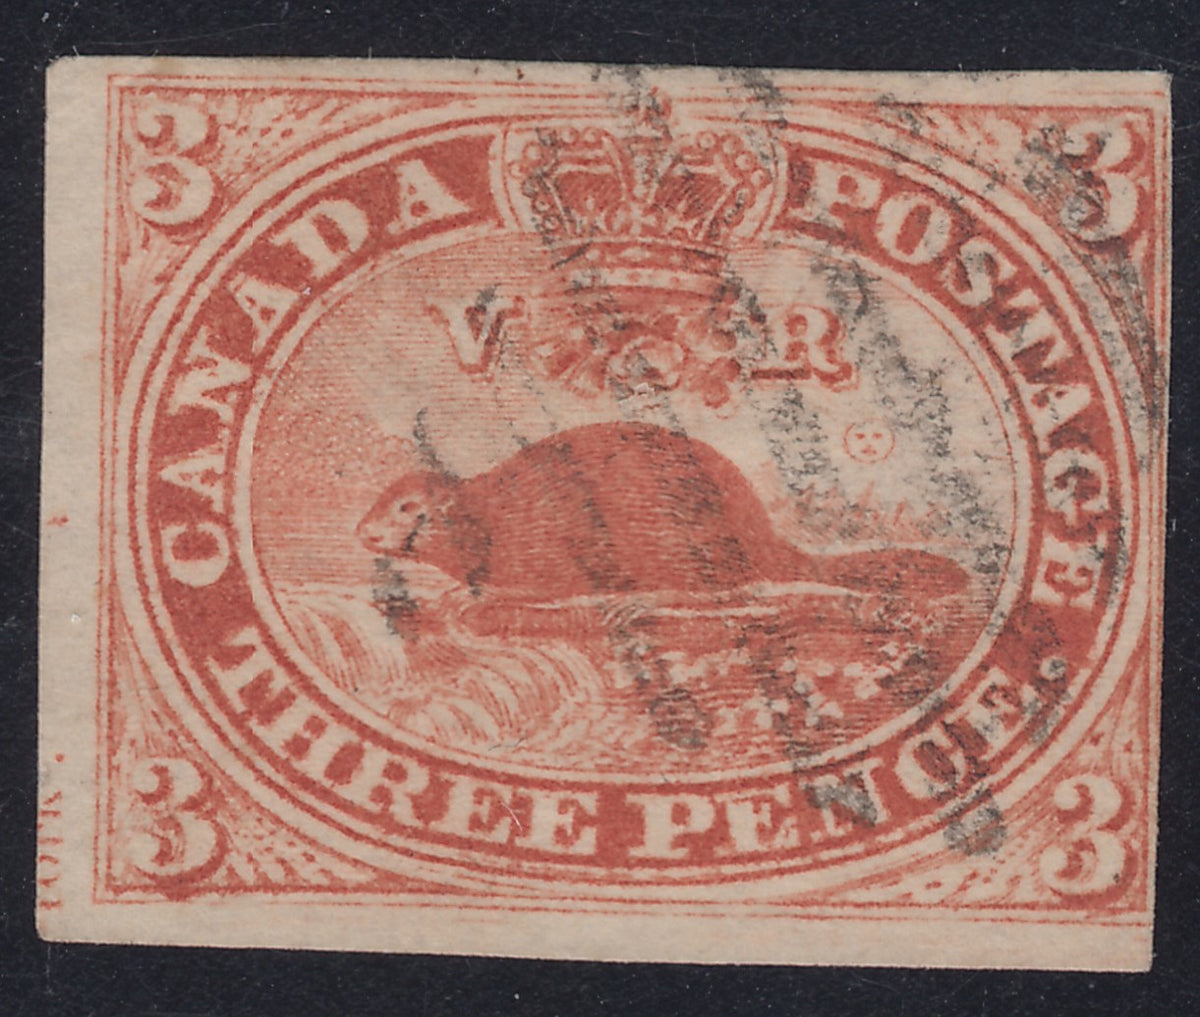 0004CA1712 - Canada #4xii - Used Major Re-Entry